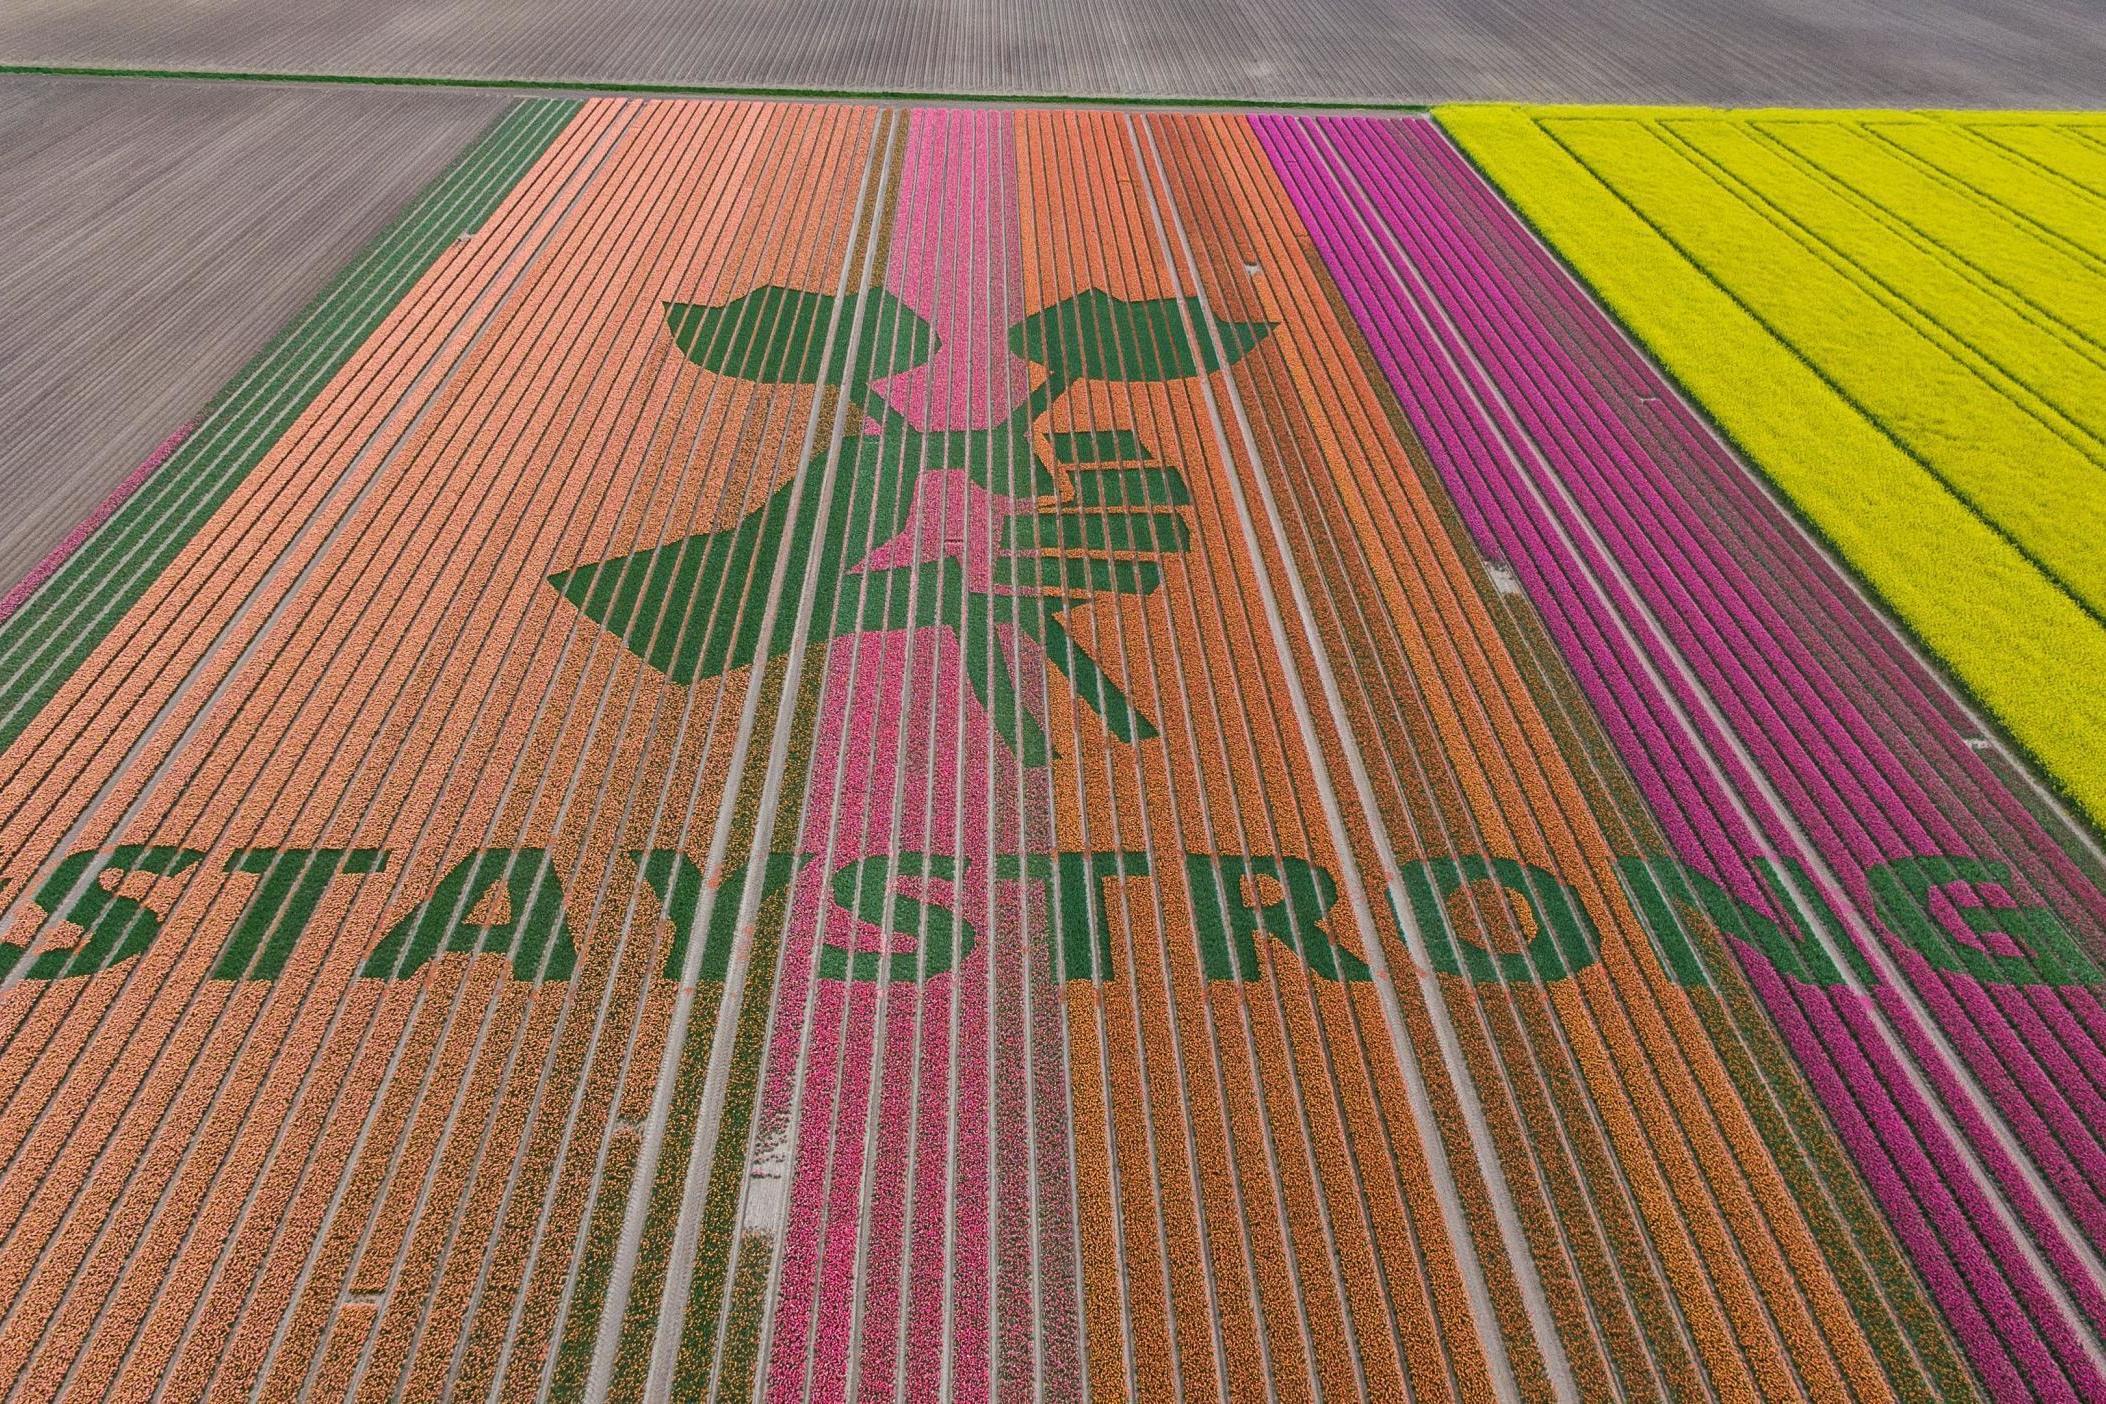 Dutch tulip farmers are using the flowers to share supportive messages (Getty)